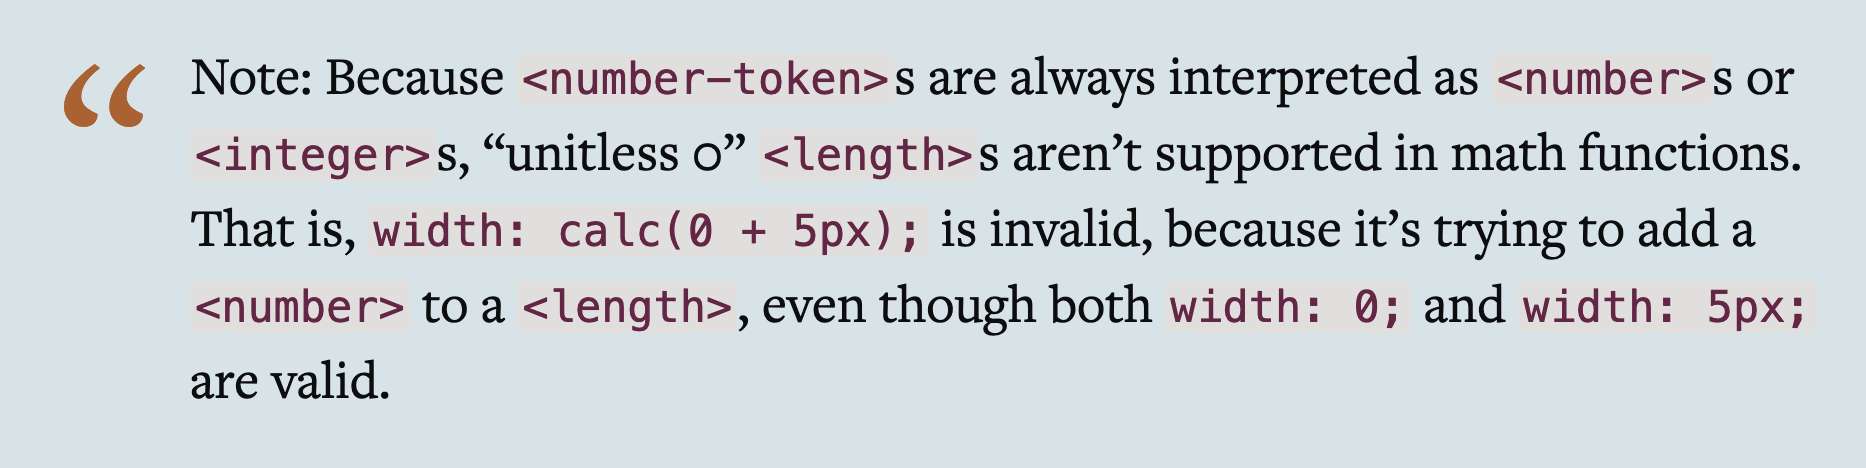 Note: Because &lt;number-token&gt;s are always interpreted as &lt;number&gt;s or &lt;integer&gt;s, “unitless 0” &lt;length&gt;s aren’t supported in math functions. That is, width: calc(0 + 5px); is invalid, because it’s trying to add a &lt;number&gt; to a &lt;length&gt;, even though both width: 0; and width: 5px; are valid.